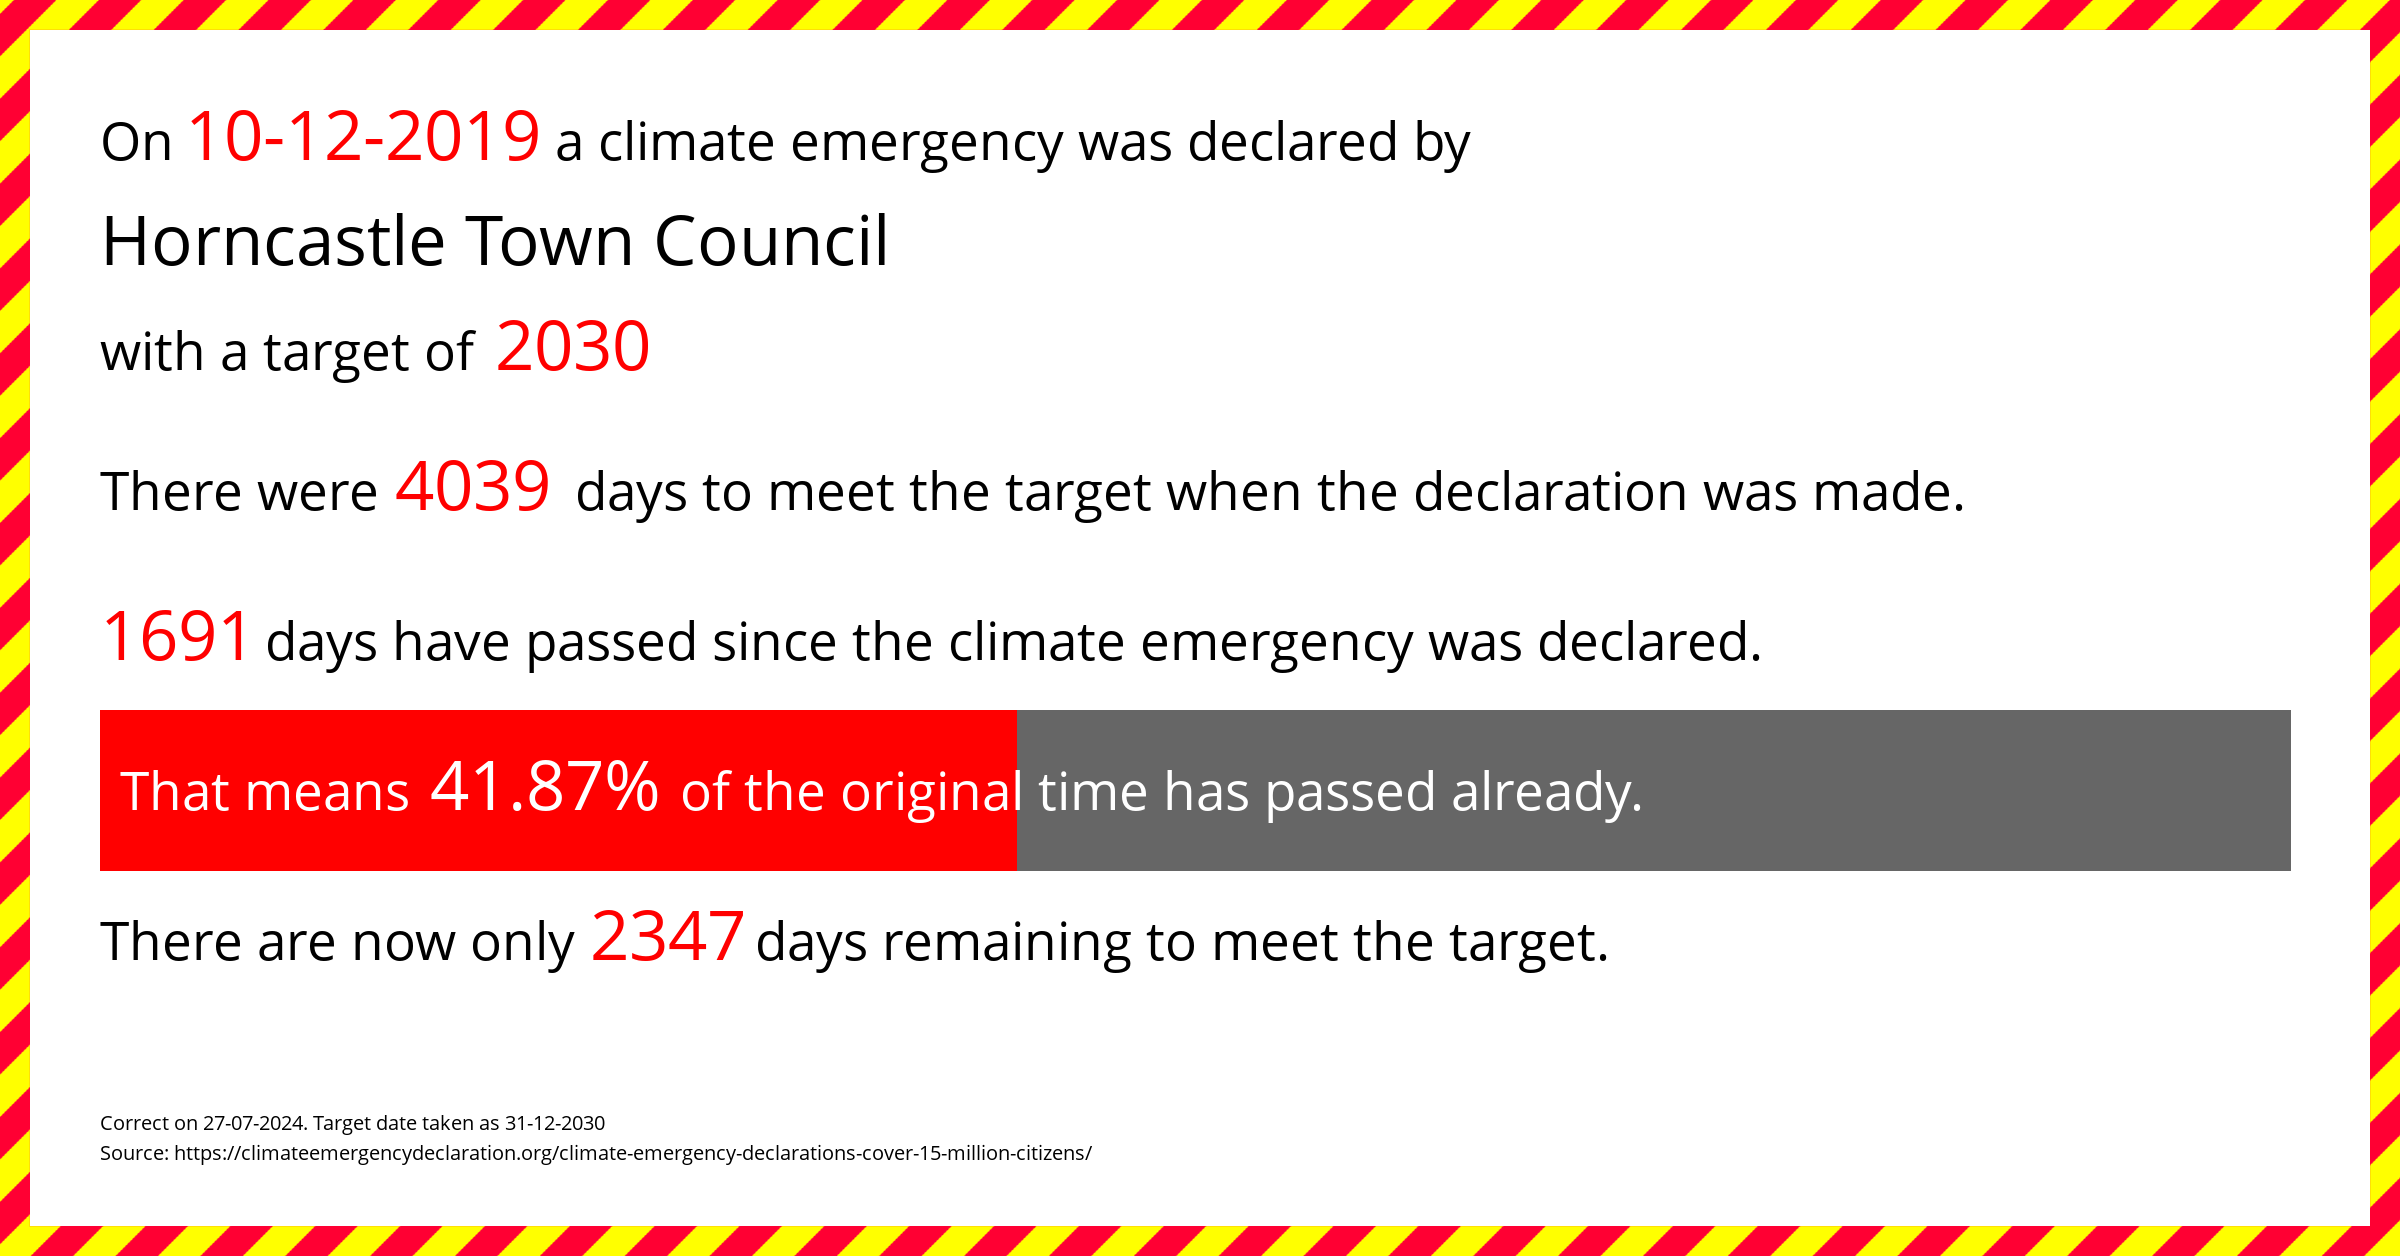 Horncastle Town Council declared a Climate emergency on Tuesday 10th December 2019, with a target of 2030.